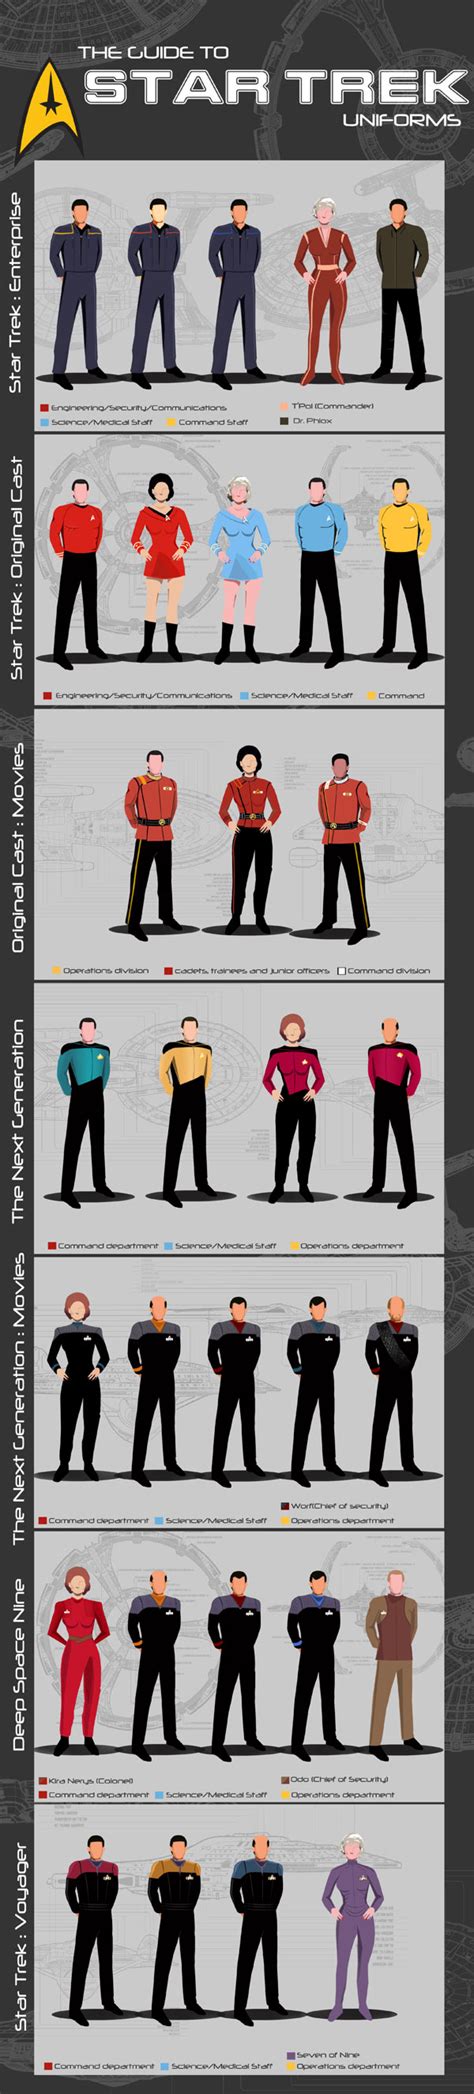 A Guide To Star Trek Uniforms Infographic Treknewsnet Your Daily